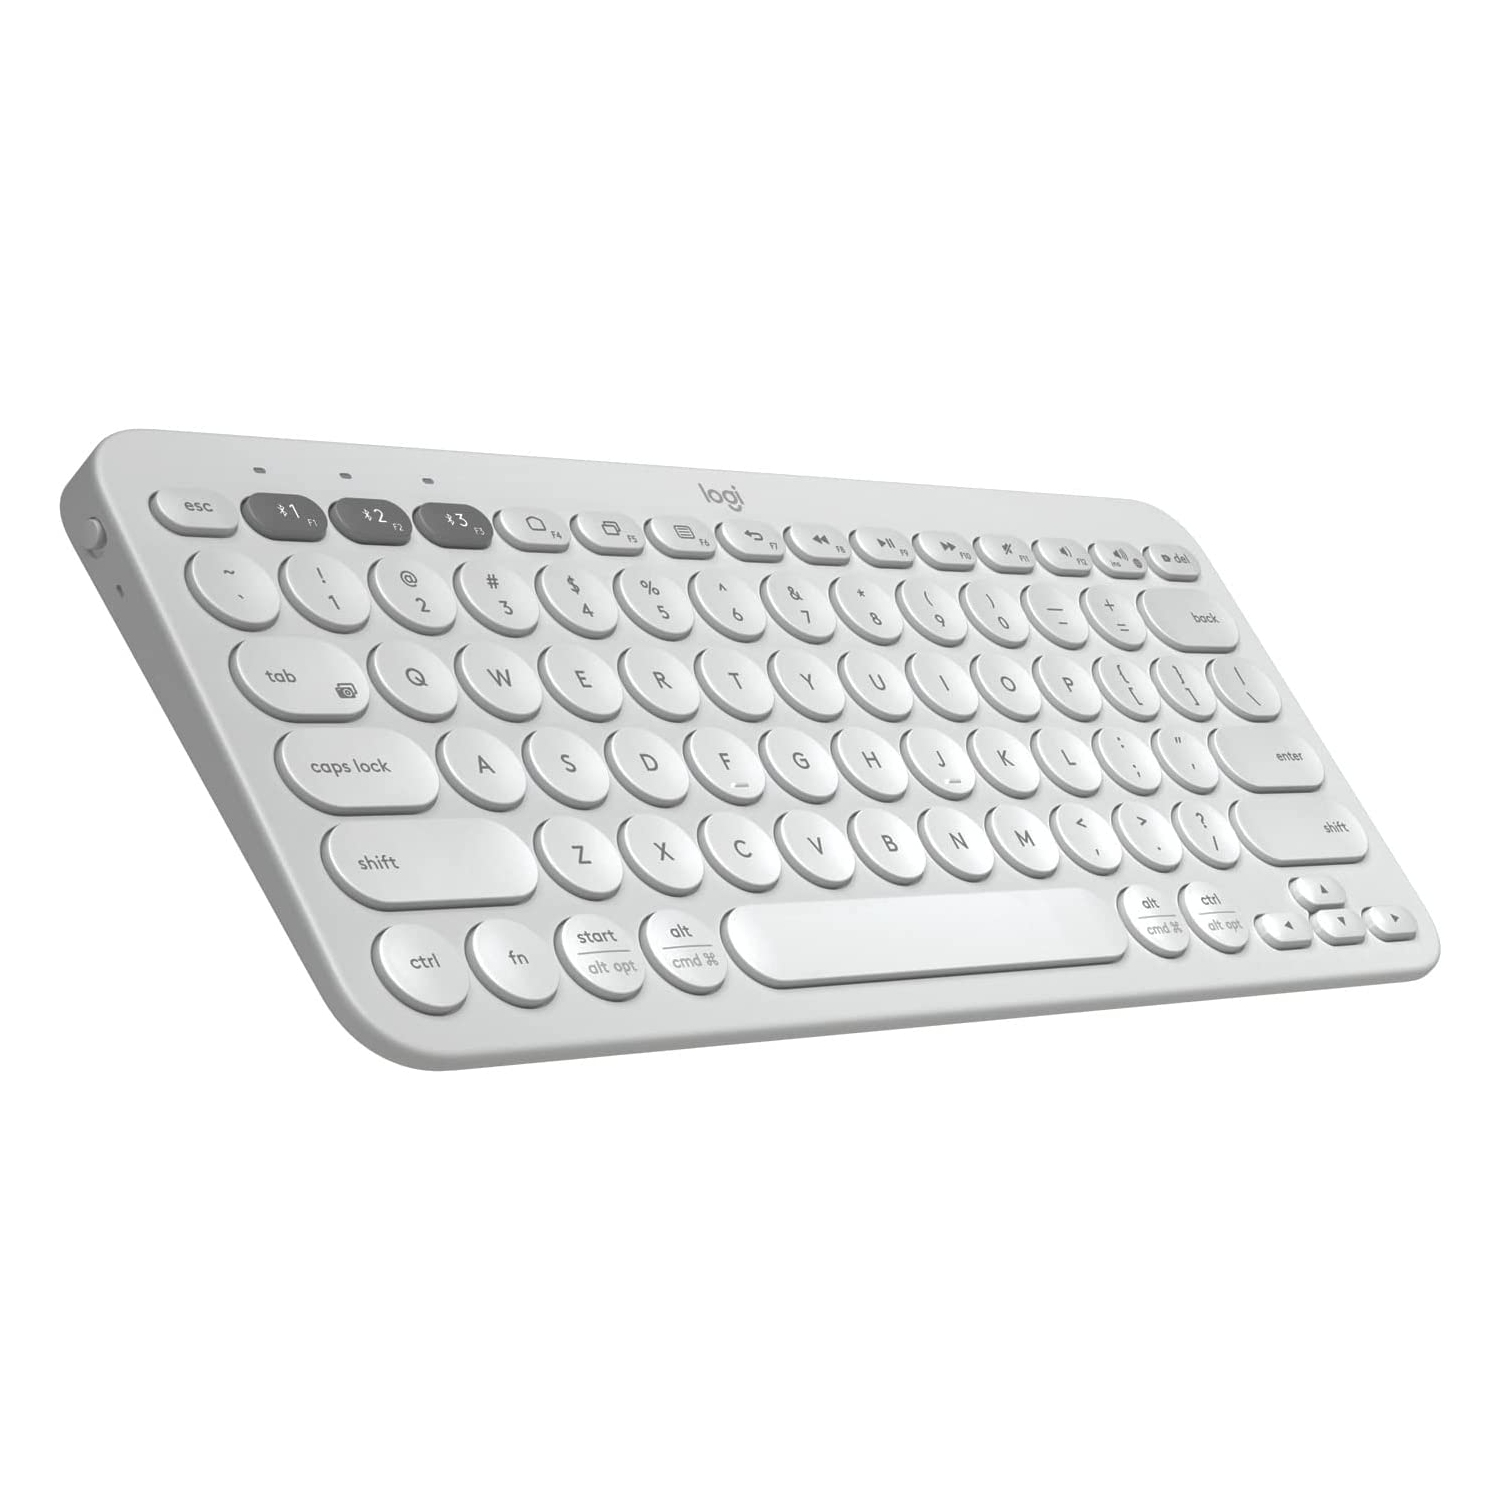 Open Box - Logitech K380 Multi-Device Bluetooth Wireless Keyboard with Easy-Switch for up to 3 Devices (White)